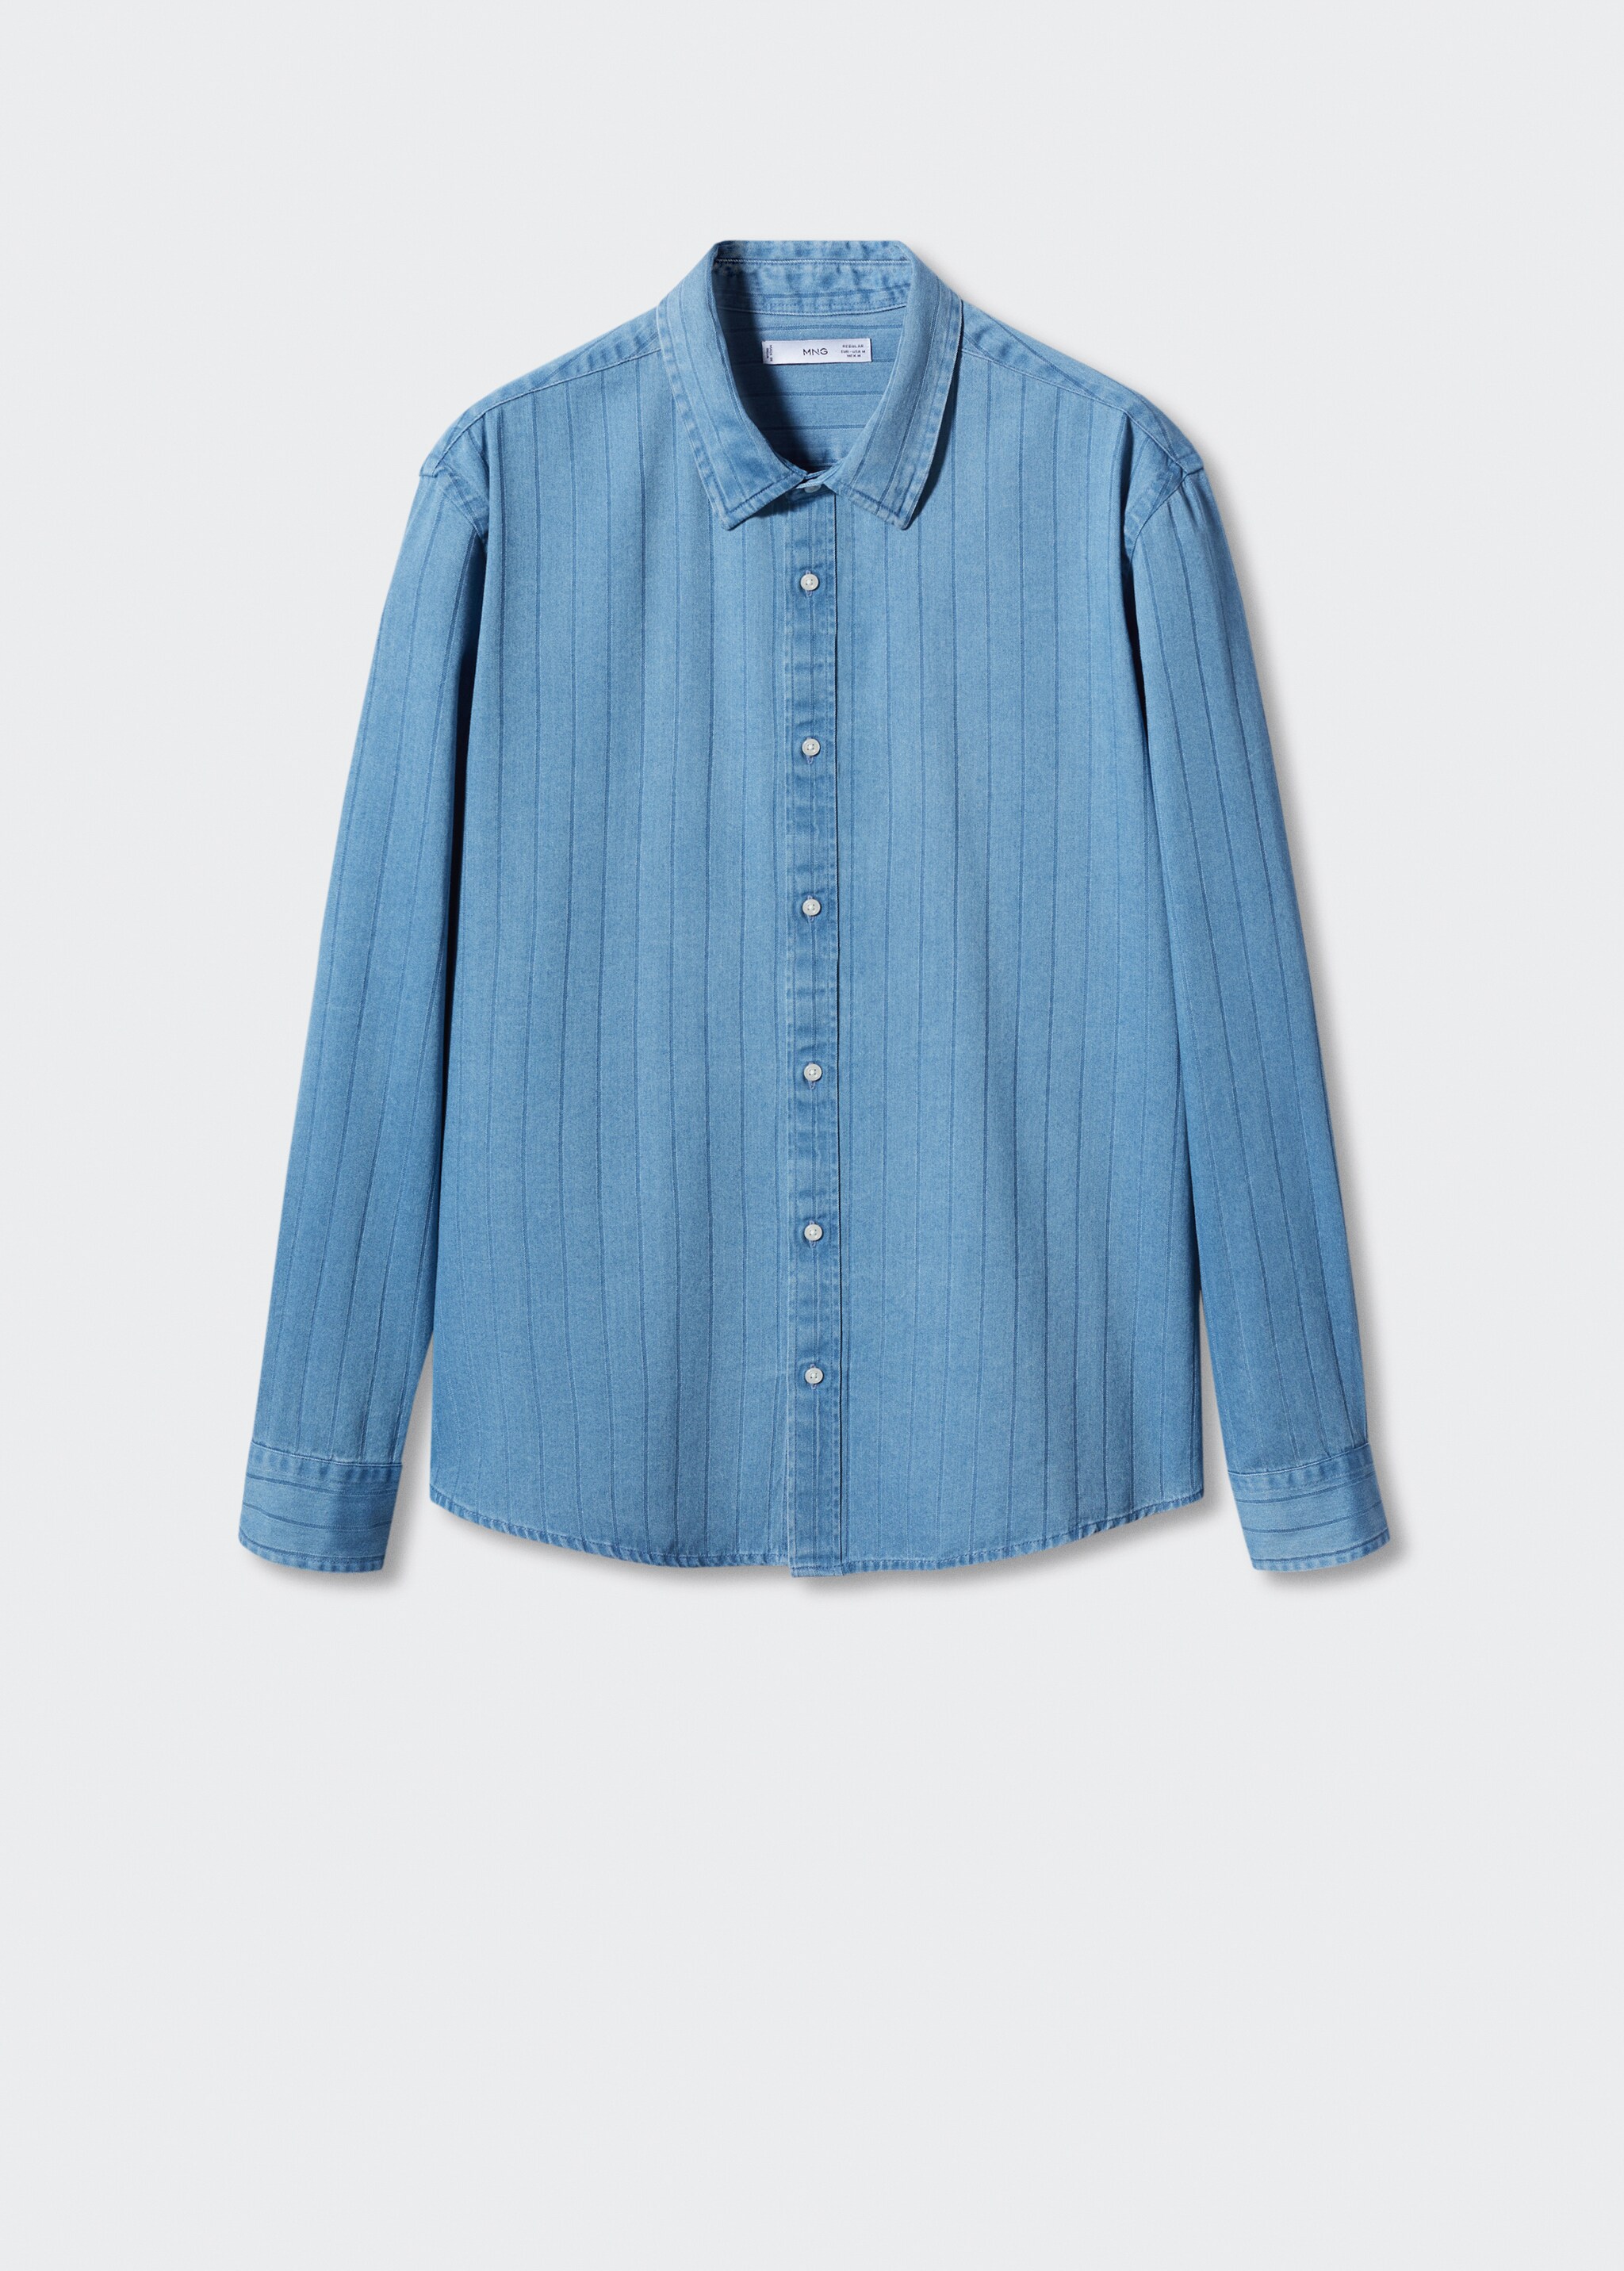 Striped denim shirt - Article without model